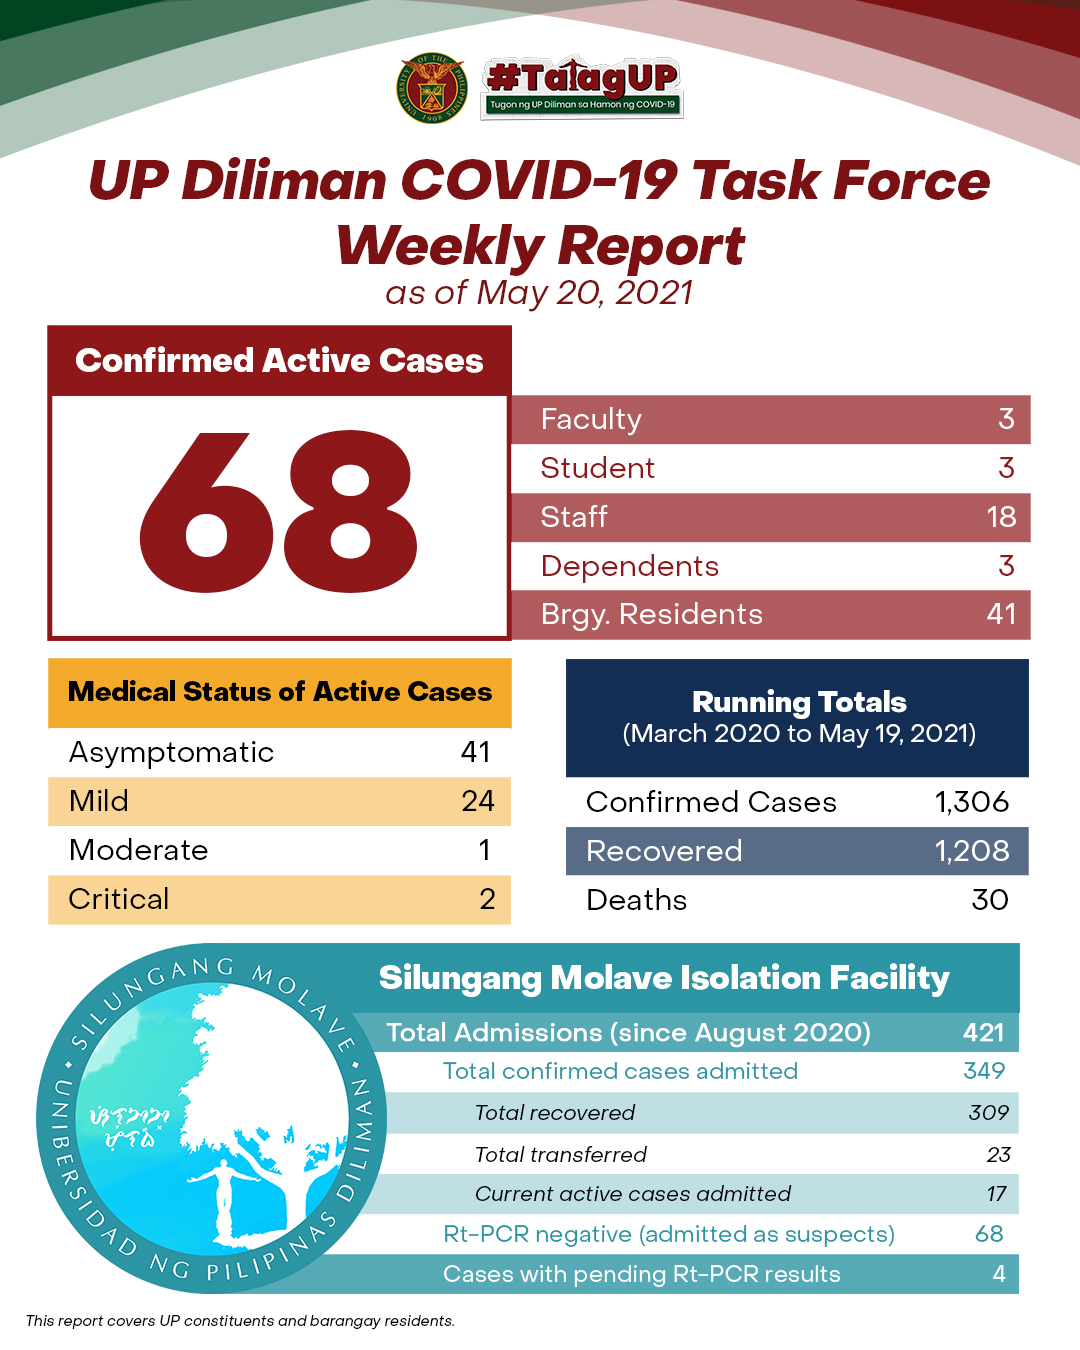 UP Diliman COVID-19 Task Force Weekly Report as of May 20, 2021